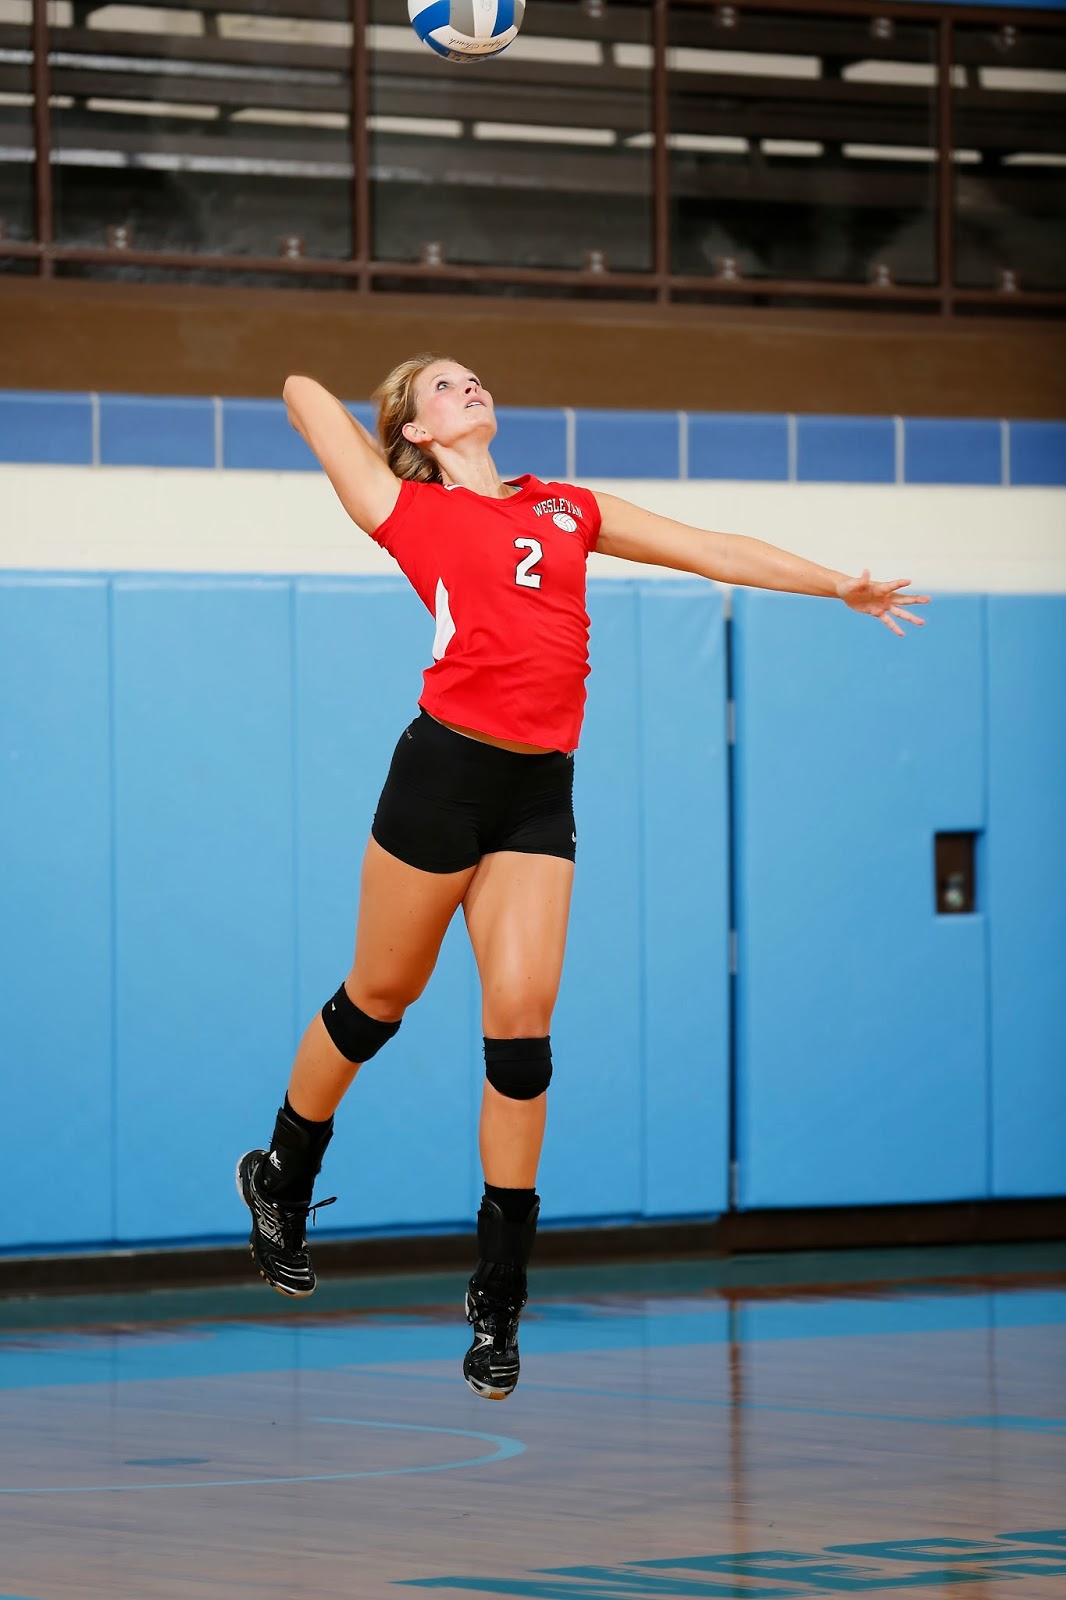 Adventures in Sports Photography: Sports Photography - Volleyball and ...